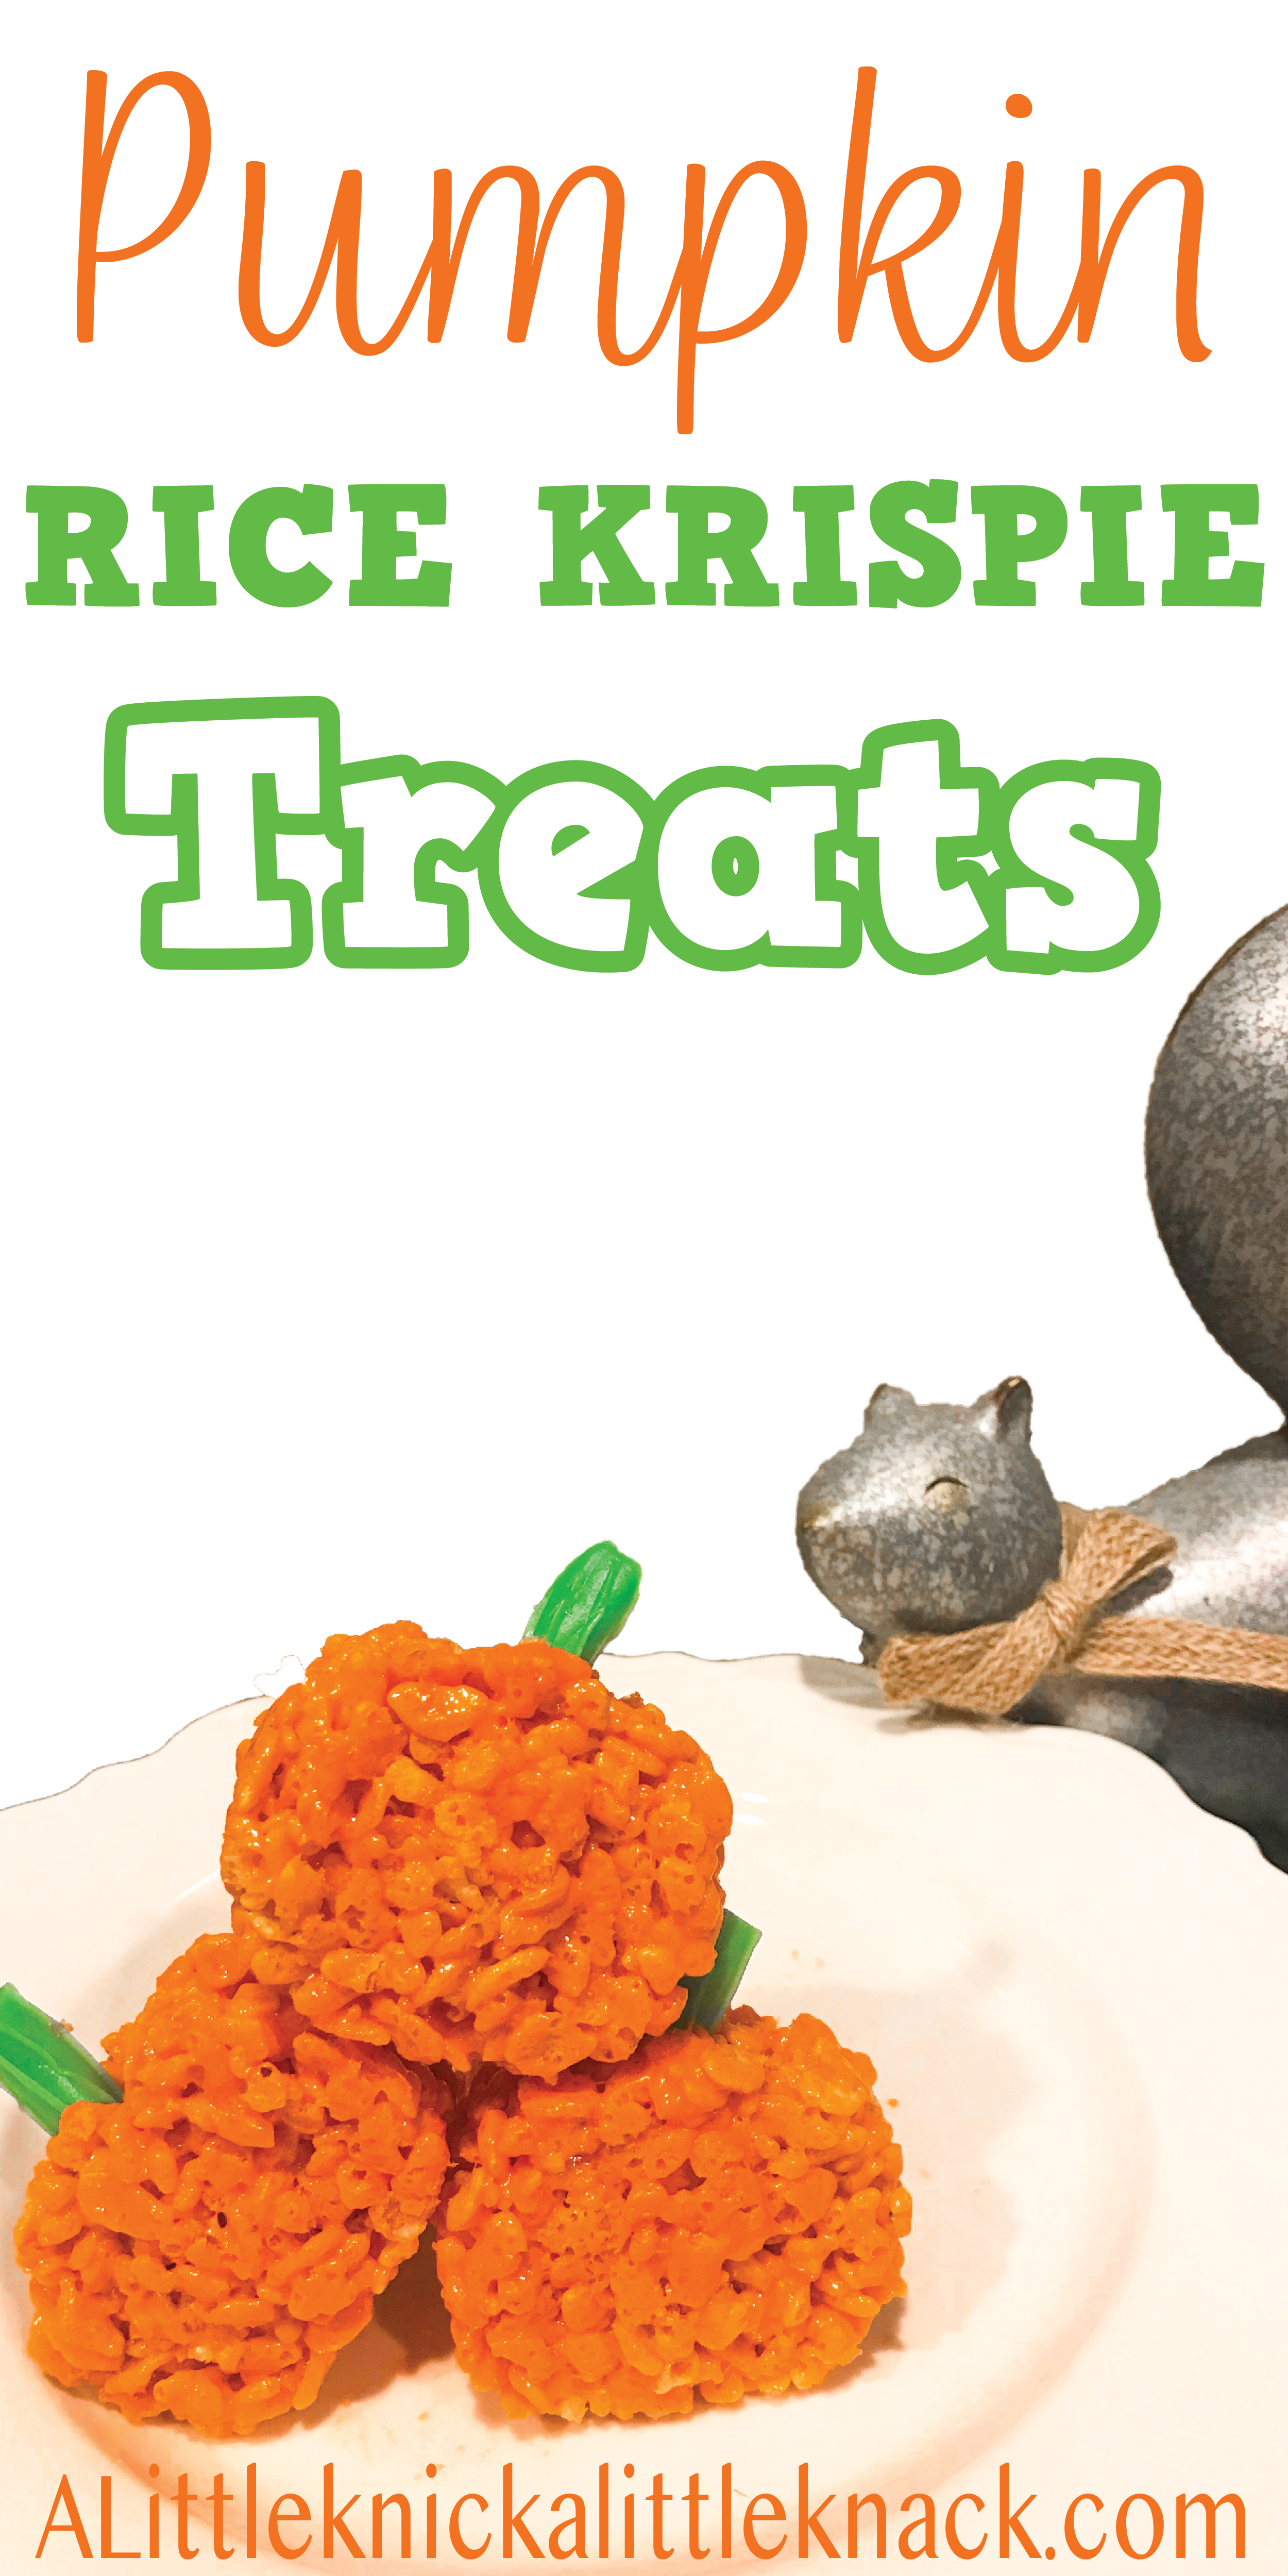 Pumpkin rice krispie treats next to a metal squirrel with a text overlay. 